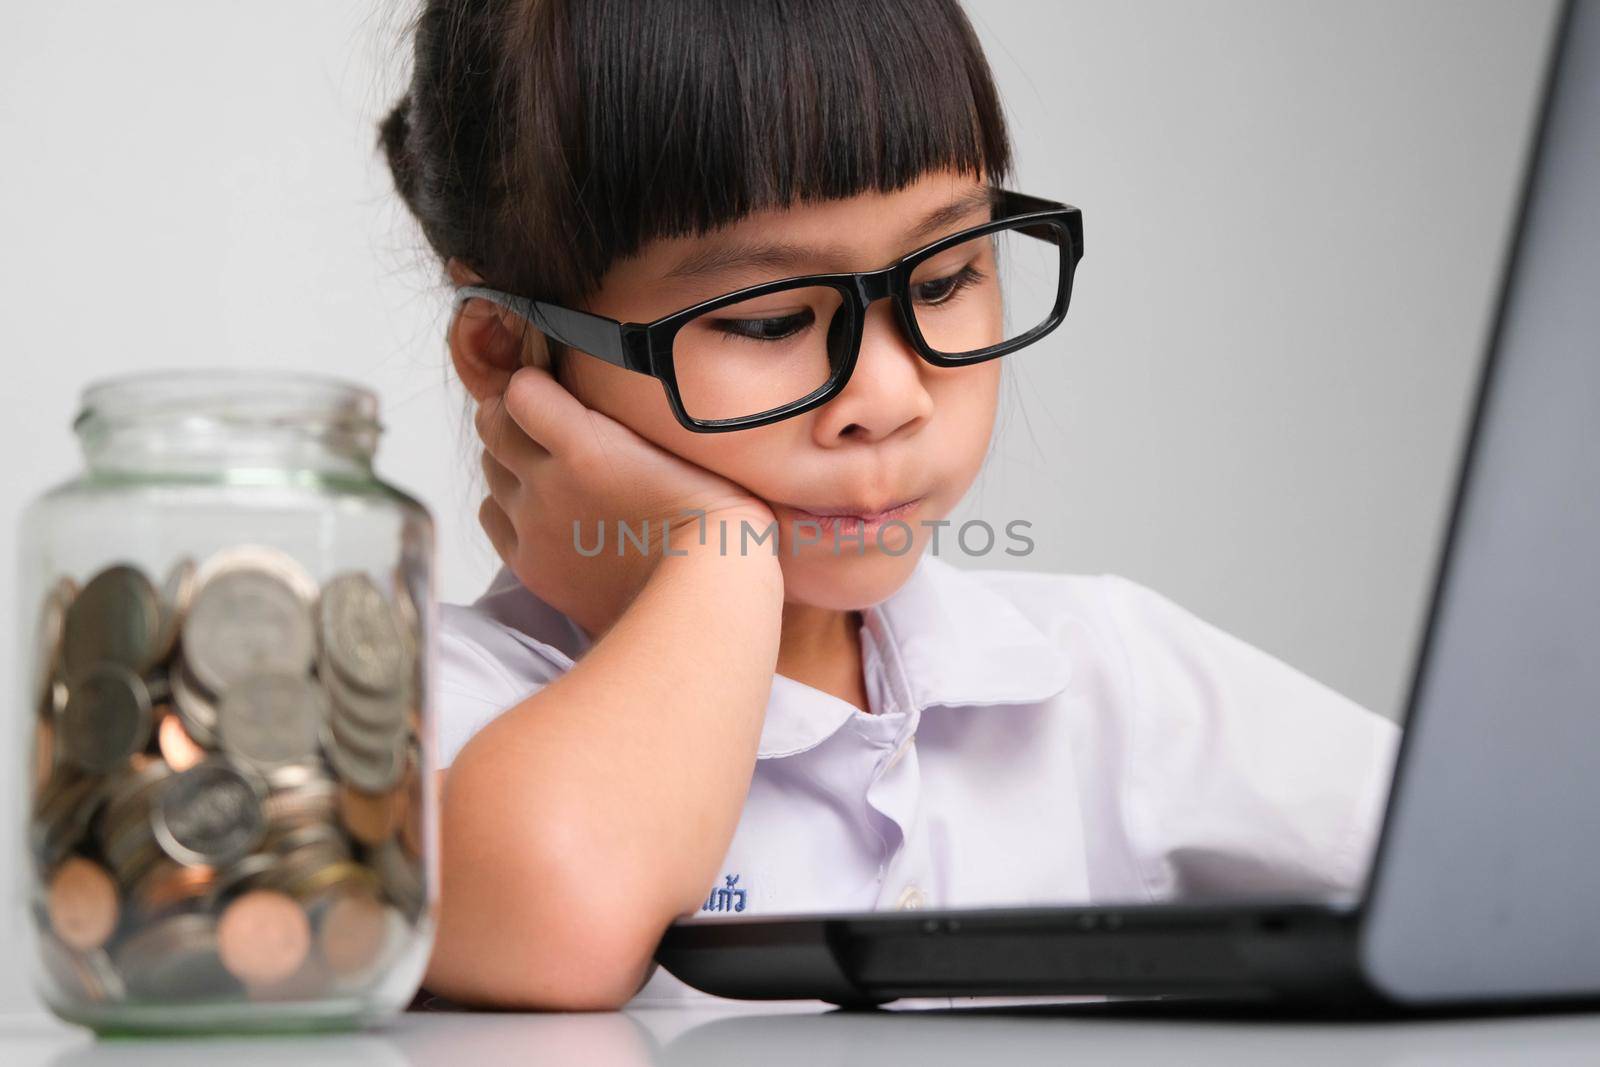 Little businesswoman with laptop working in office with coins in a glass jar on the table. Children and business concept by TEERASAK